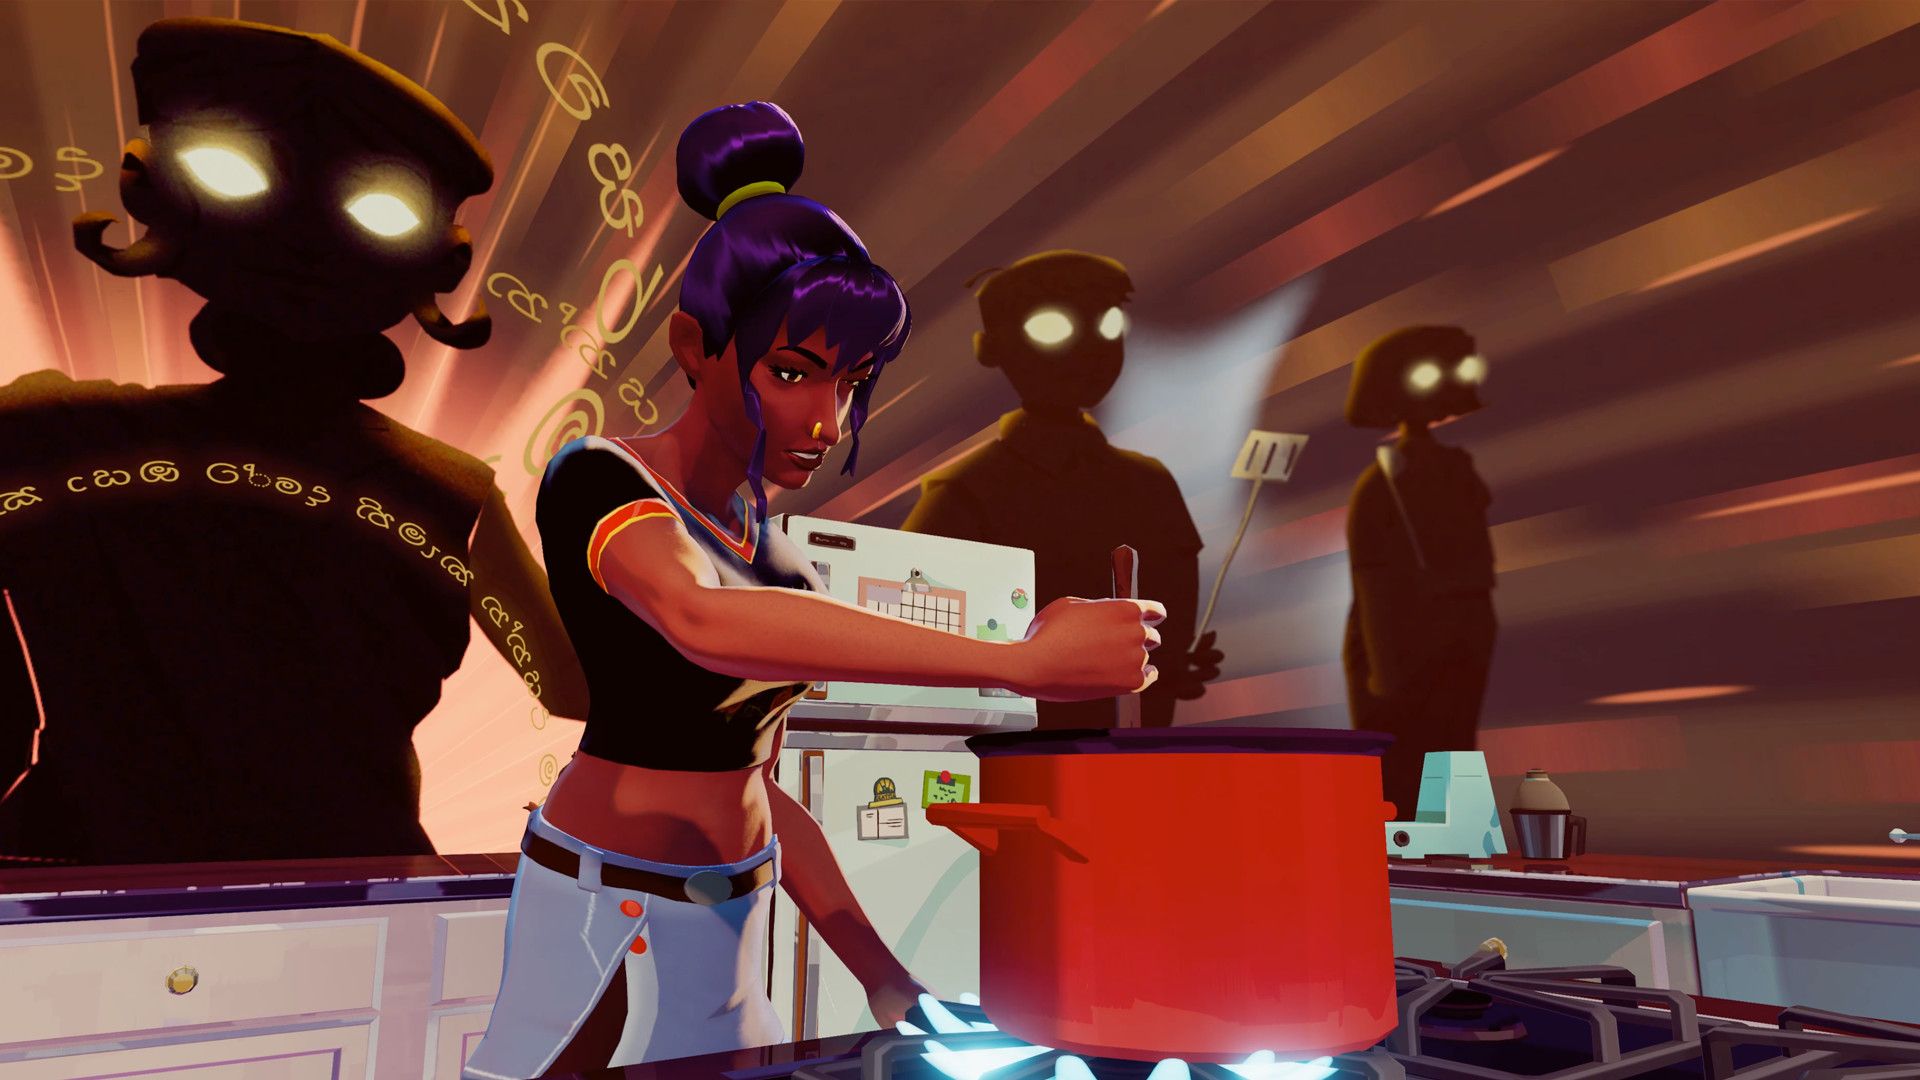 Video game screenshot of a woman stirring a pot on a stove